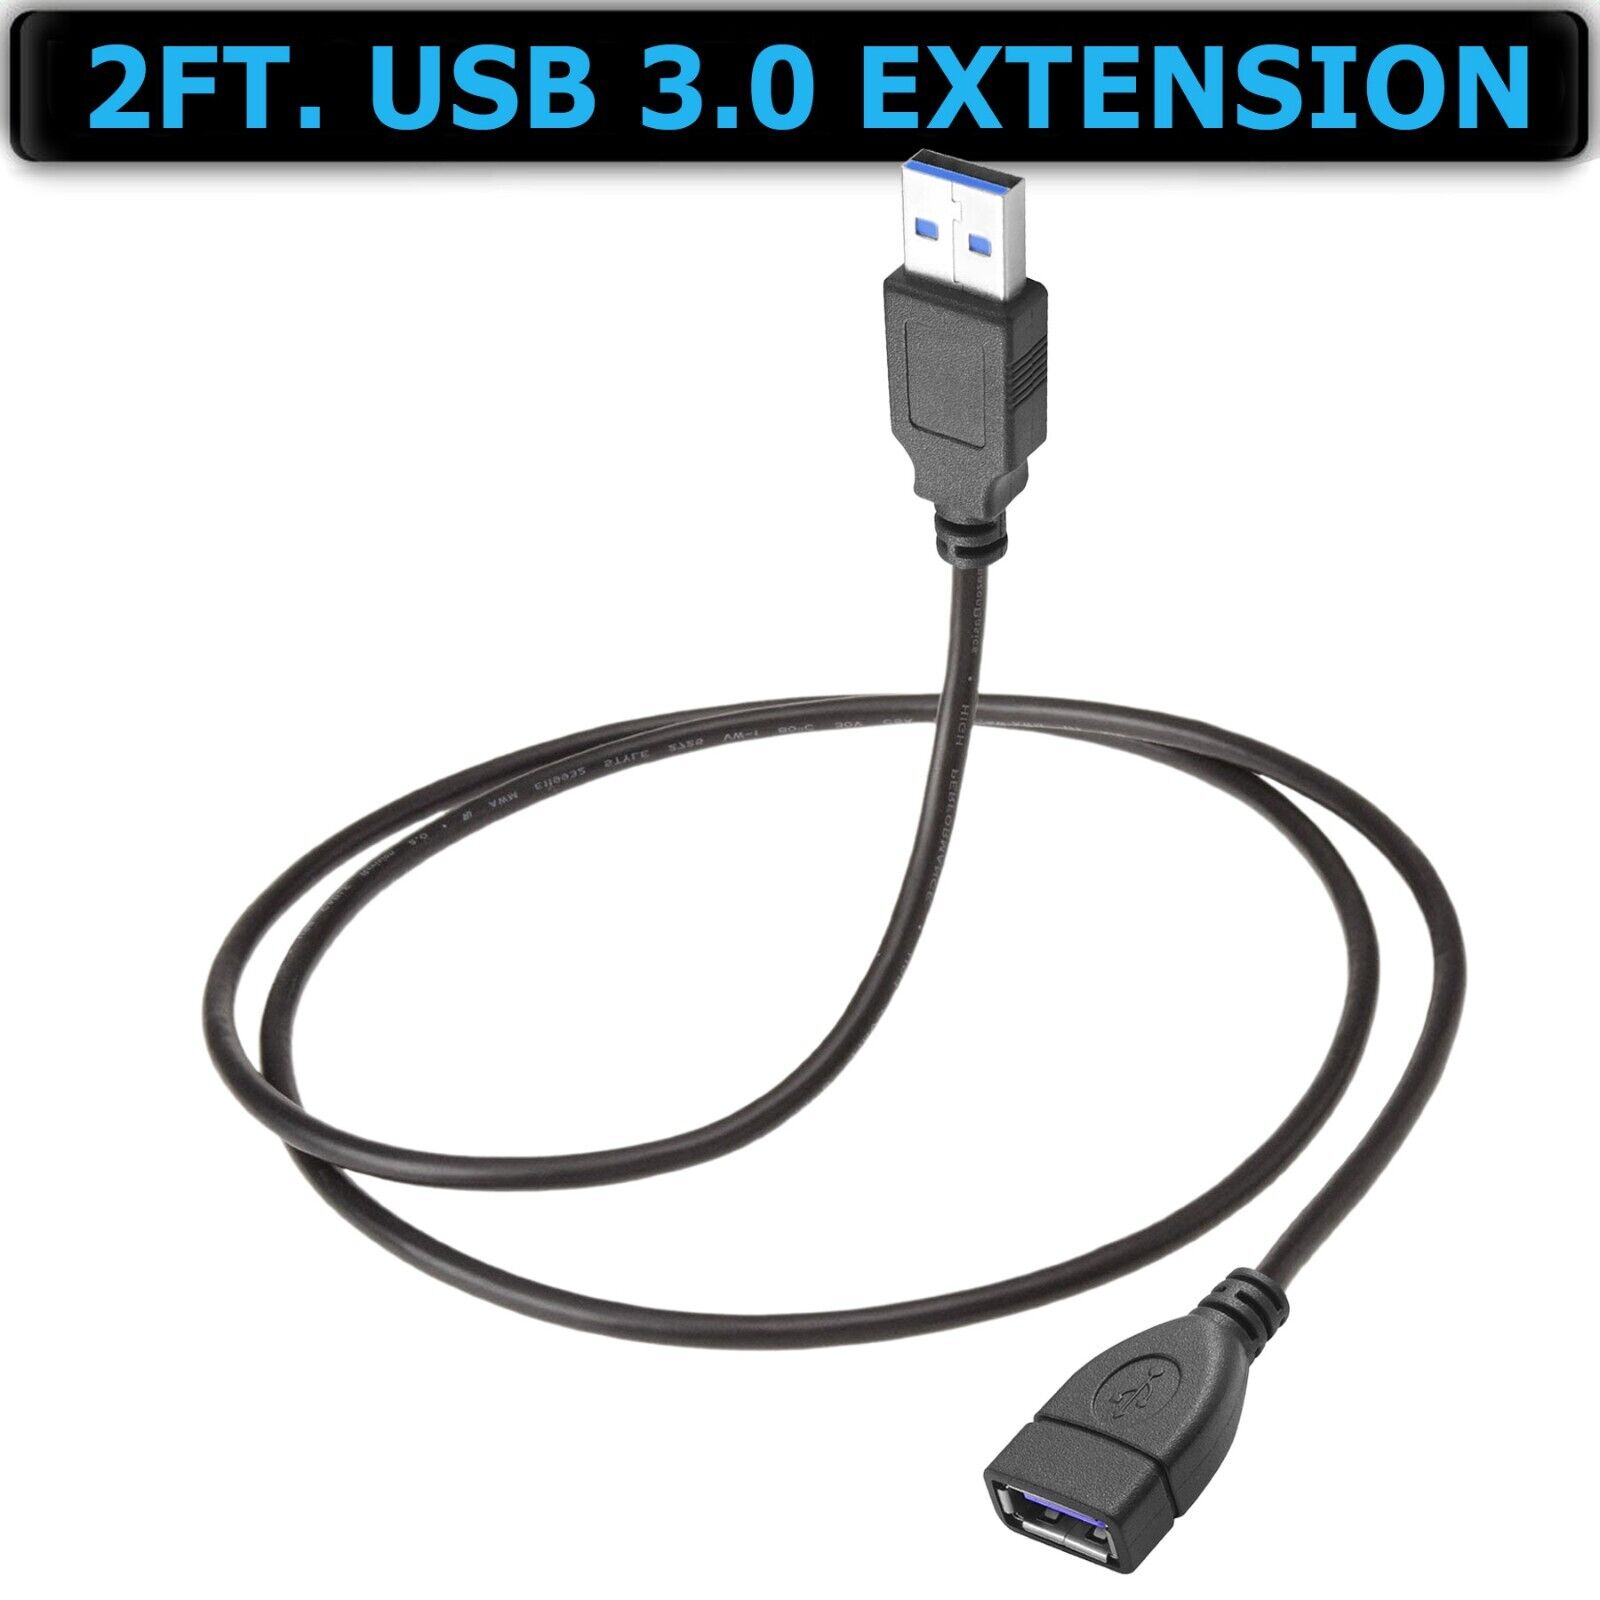 USB 3.0 Extension Extender Cable Cord Type A Male to A Female 3-15FT HIGH SPEED